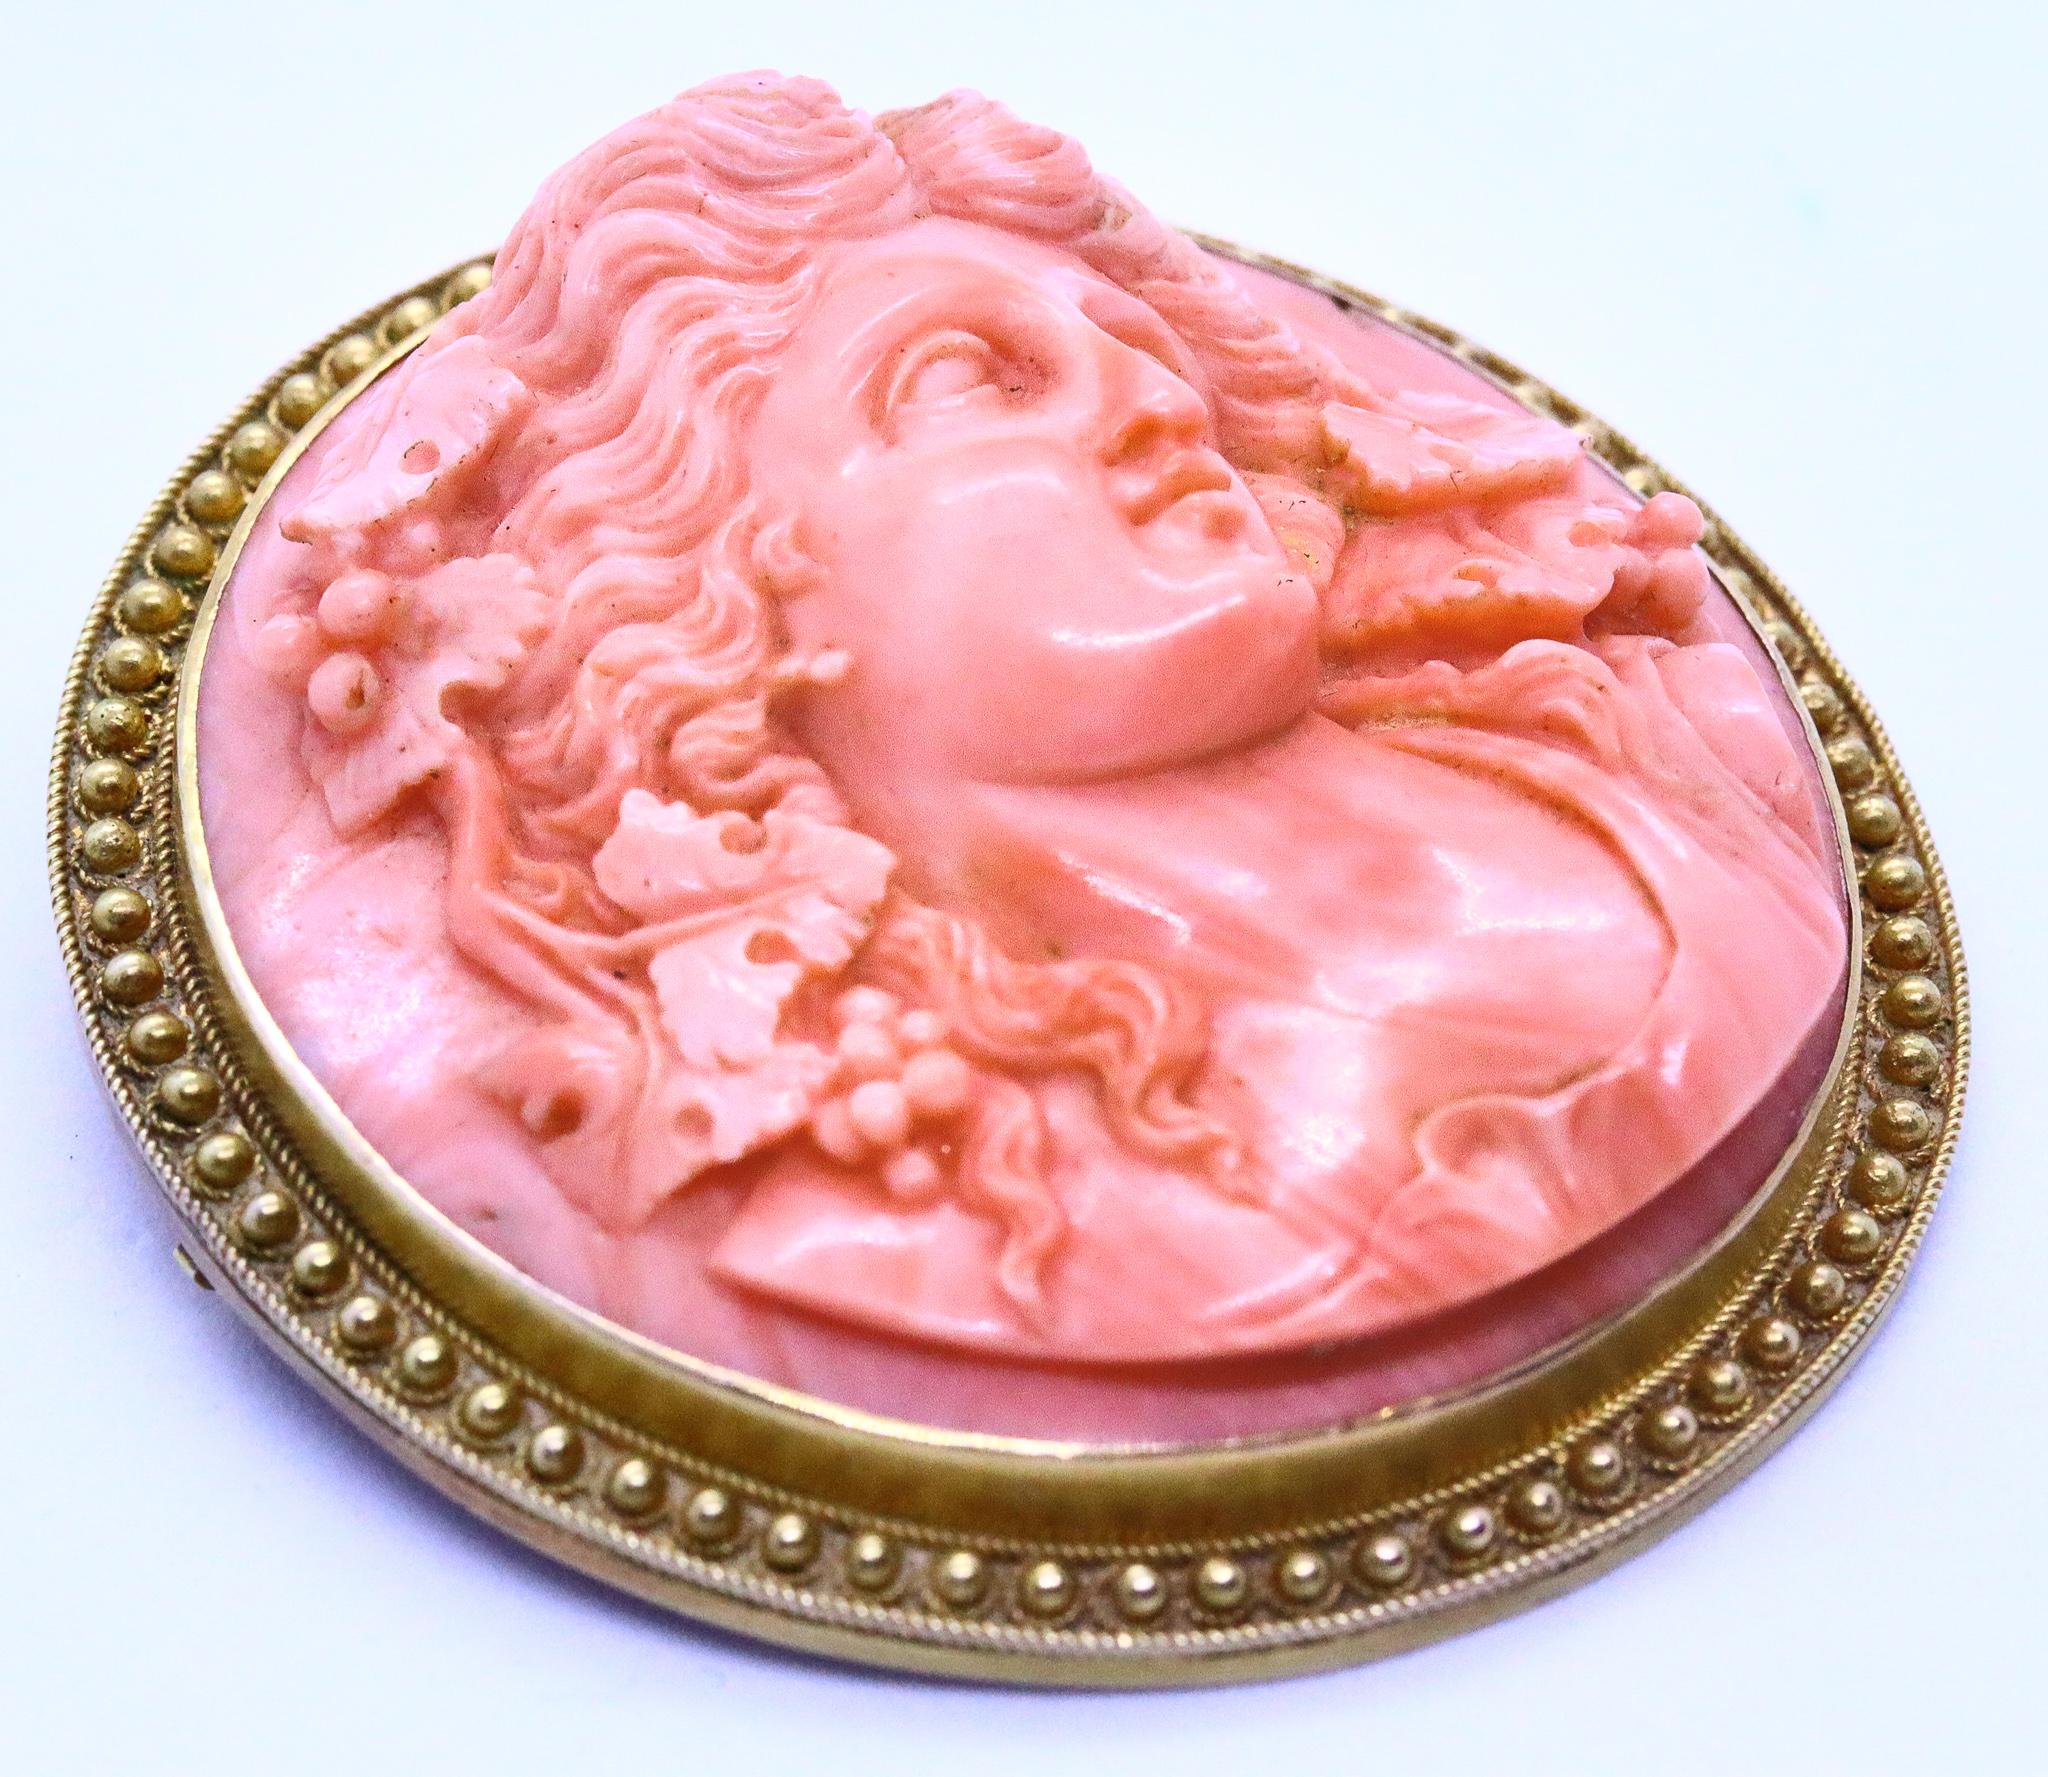 Women's Victorian 1860 Etruscan Revival Pendant Brooch in 18k Gold with Coral Carving